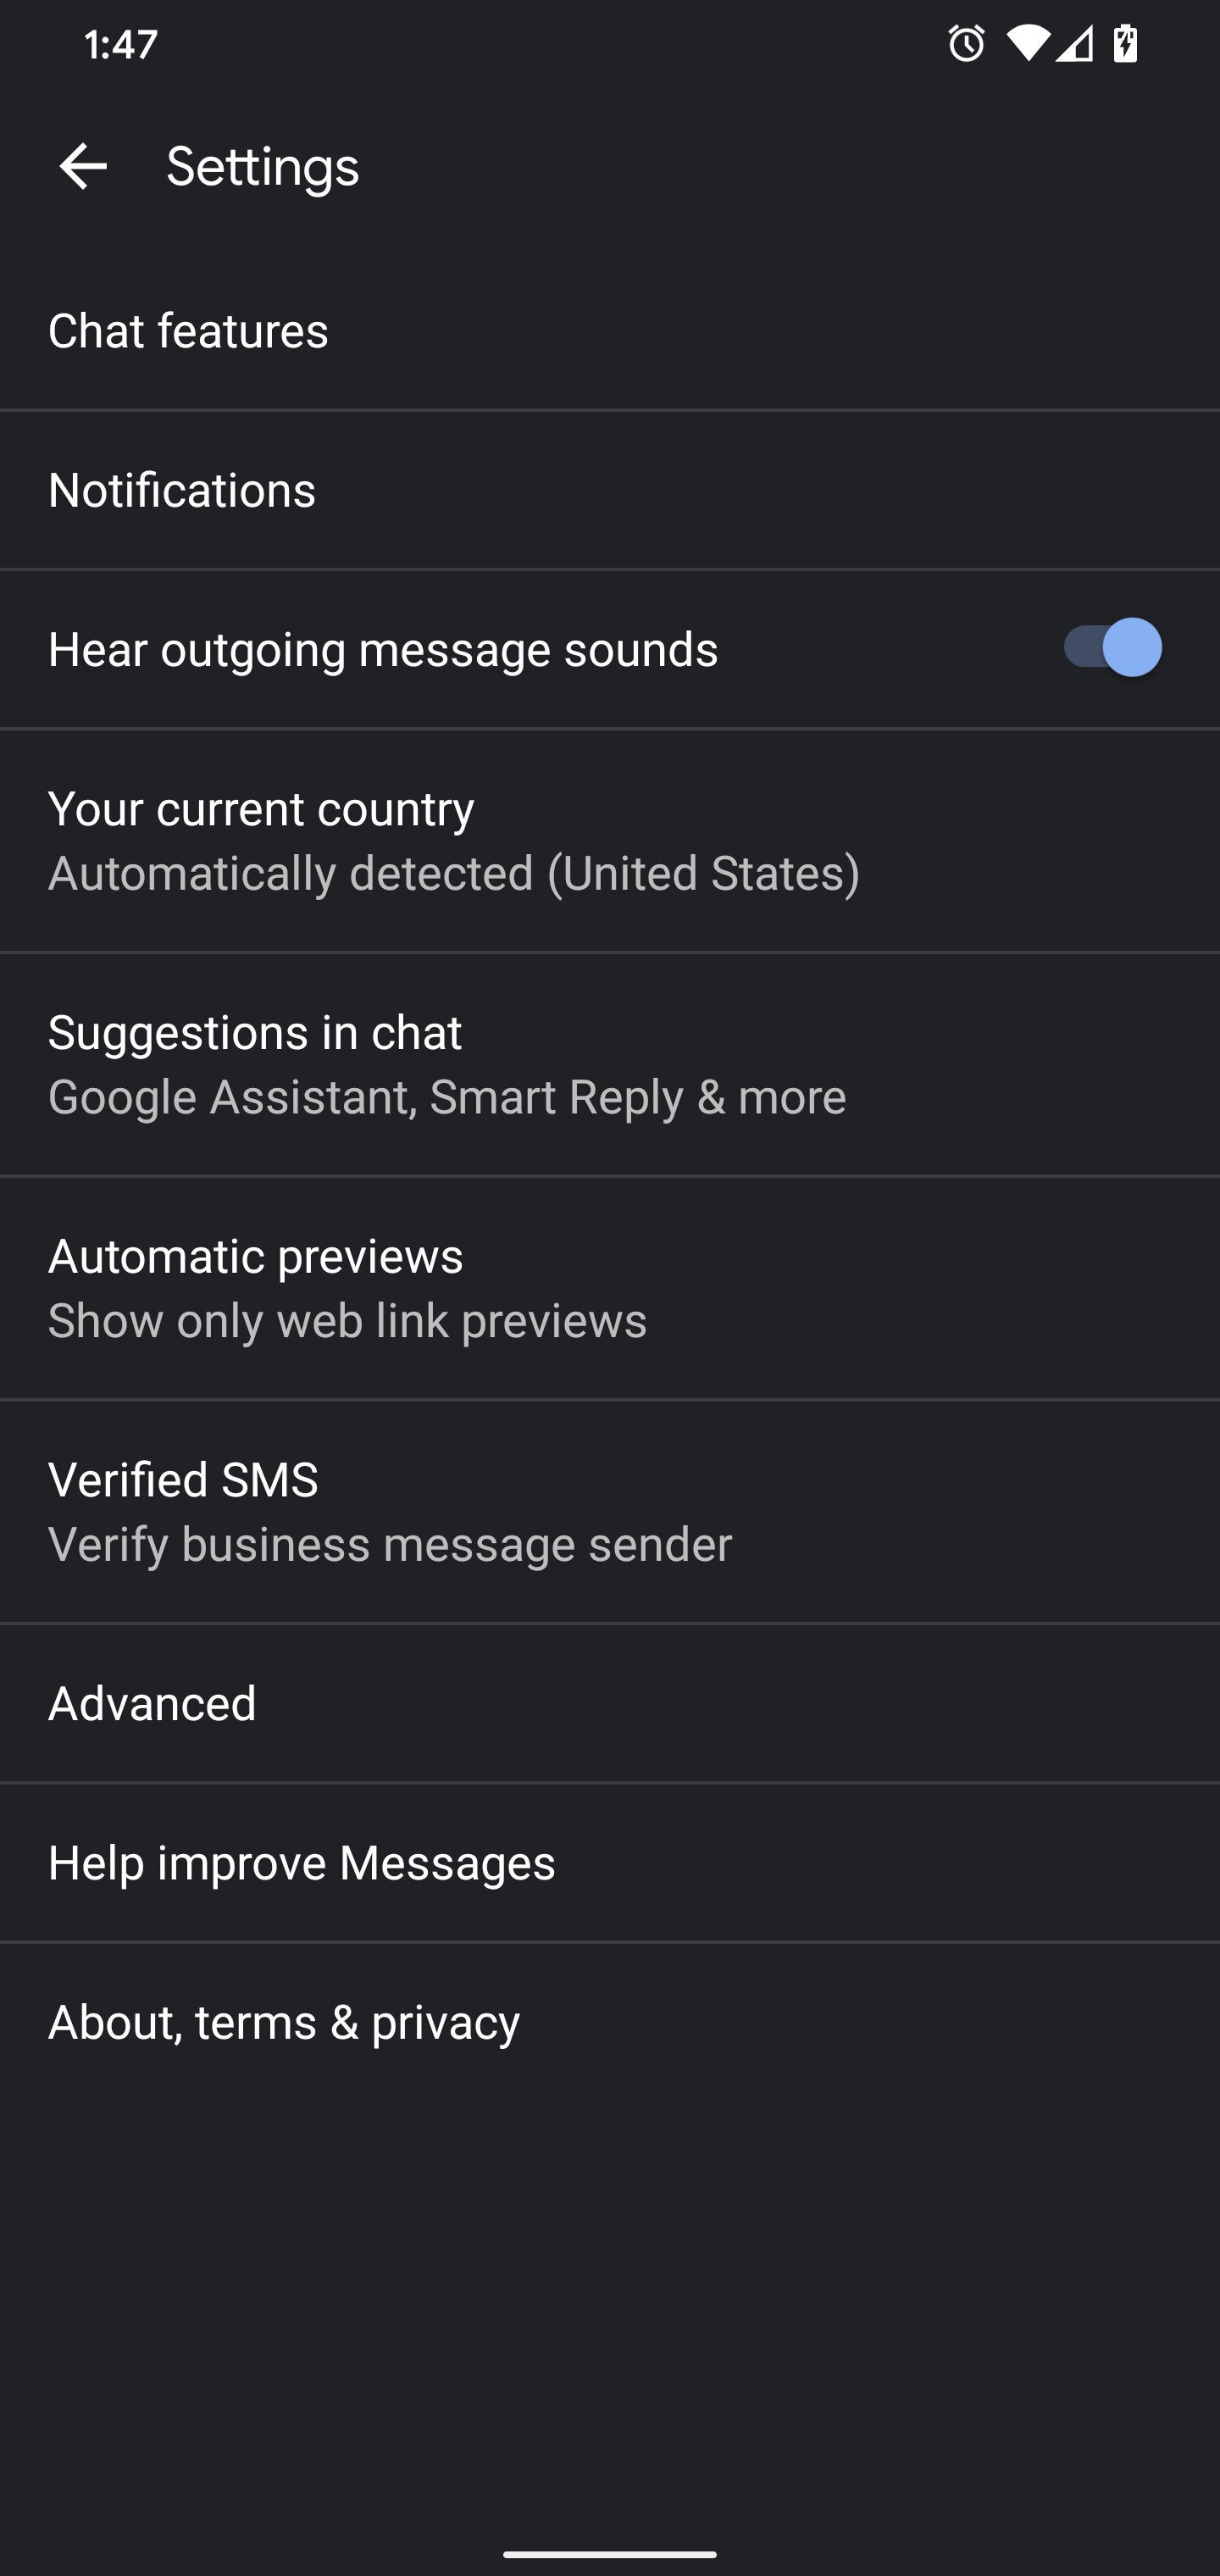 Google Messages update adds long-awaited Verified SMS feature